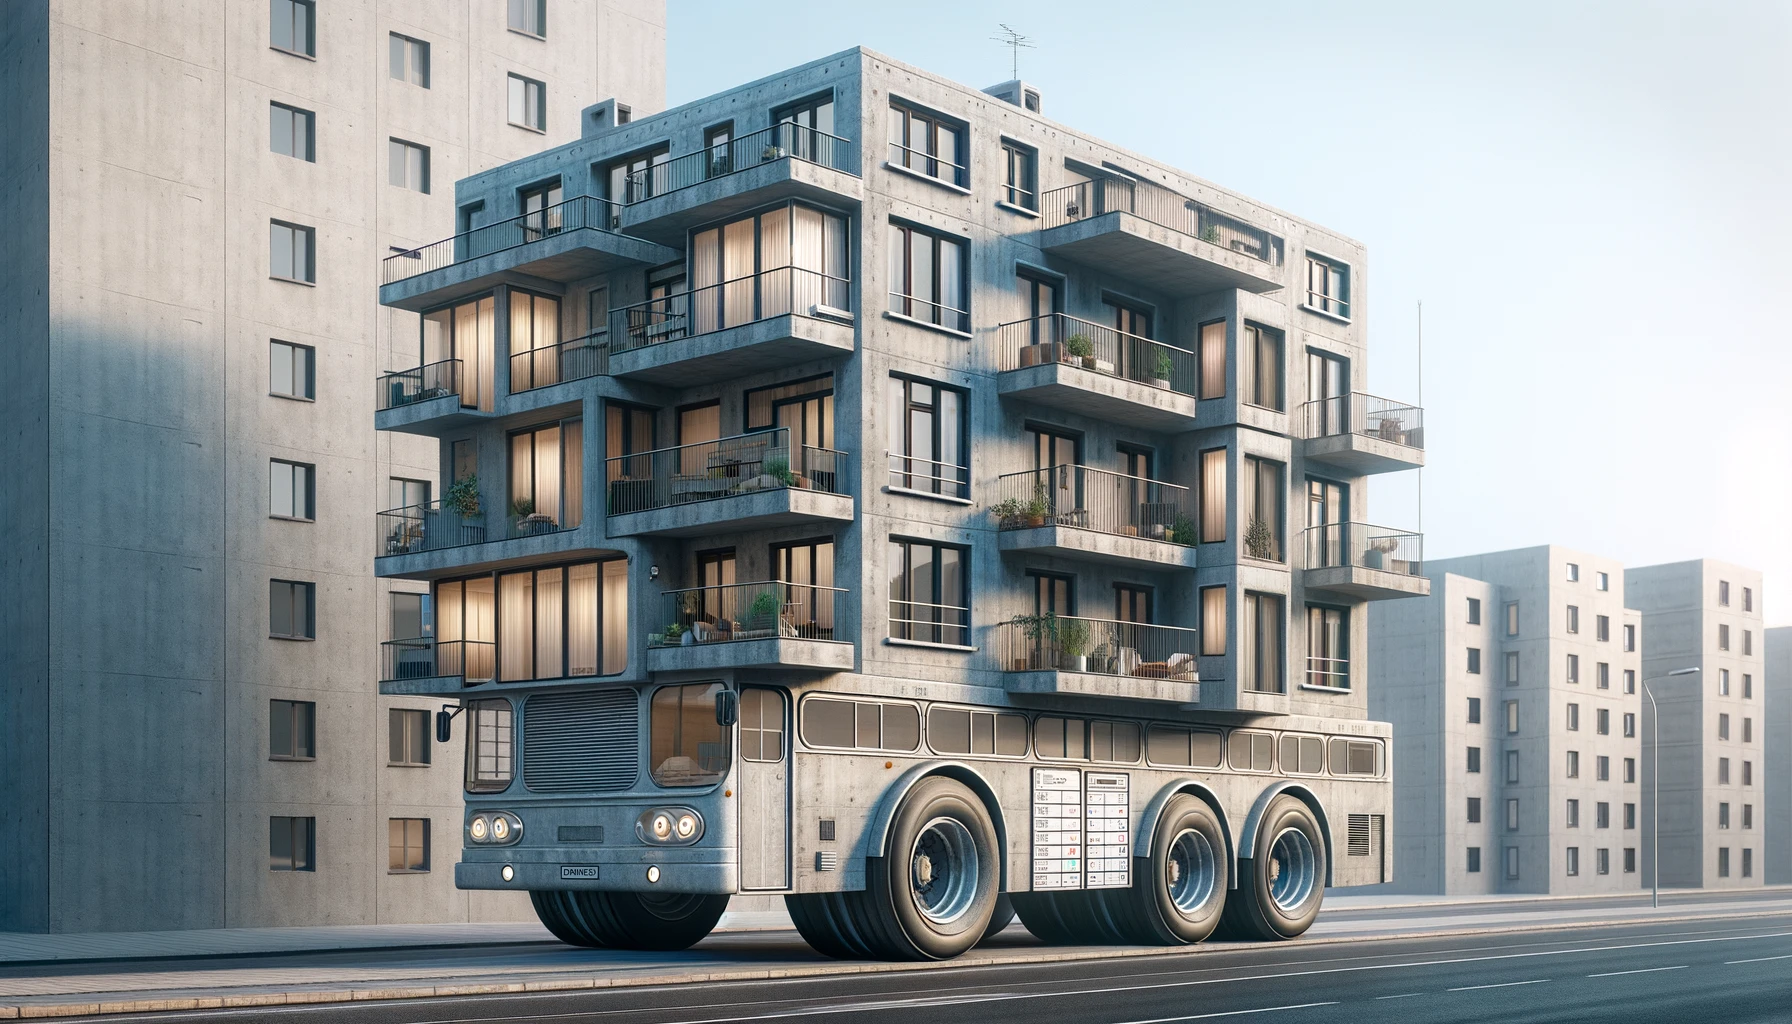 A concrete apartment building modified to function as a city bus. The building has multiple floors, typical apartment windows, and balconies, but is set on large bus wheels. It includes a front door designed like a bus door, and the sides display bus route information. The setting is an urban street, illustrating the contrast between this unique bus and the surrounding cityscape.